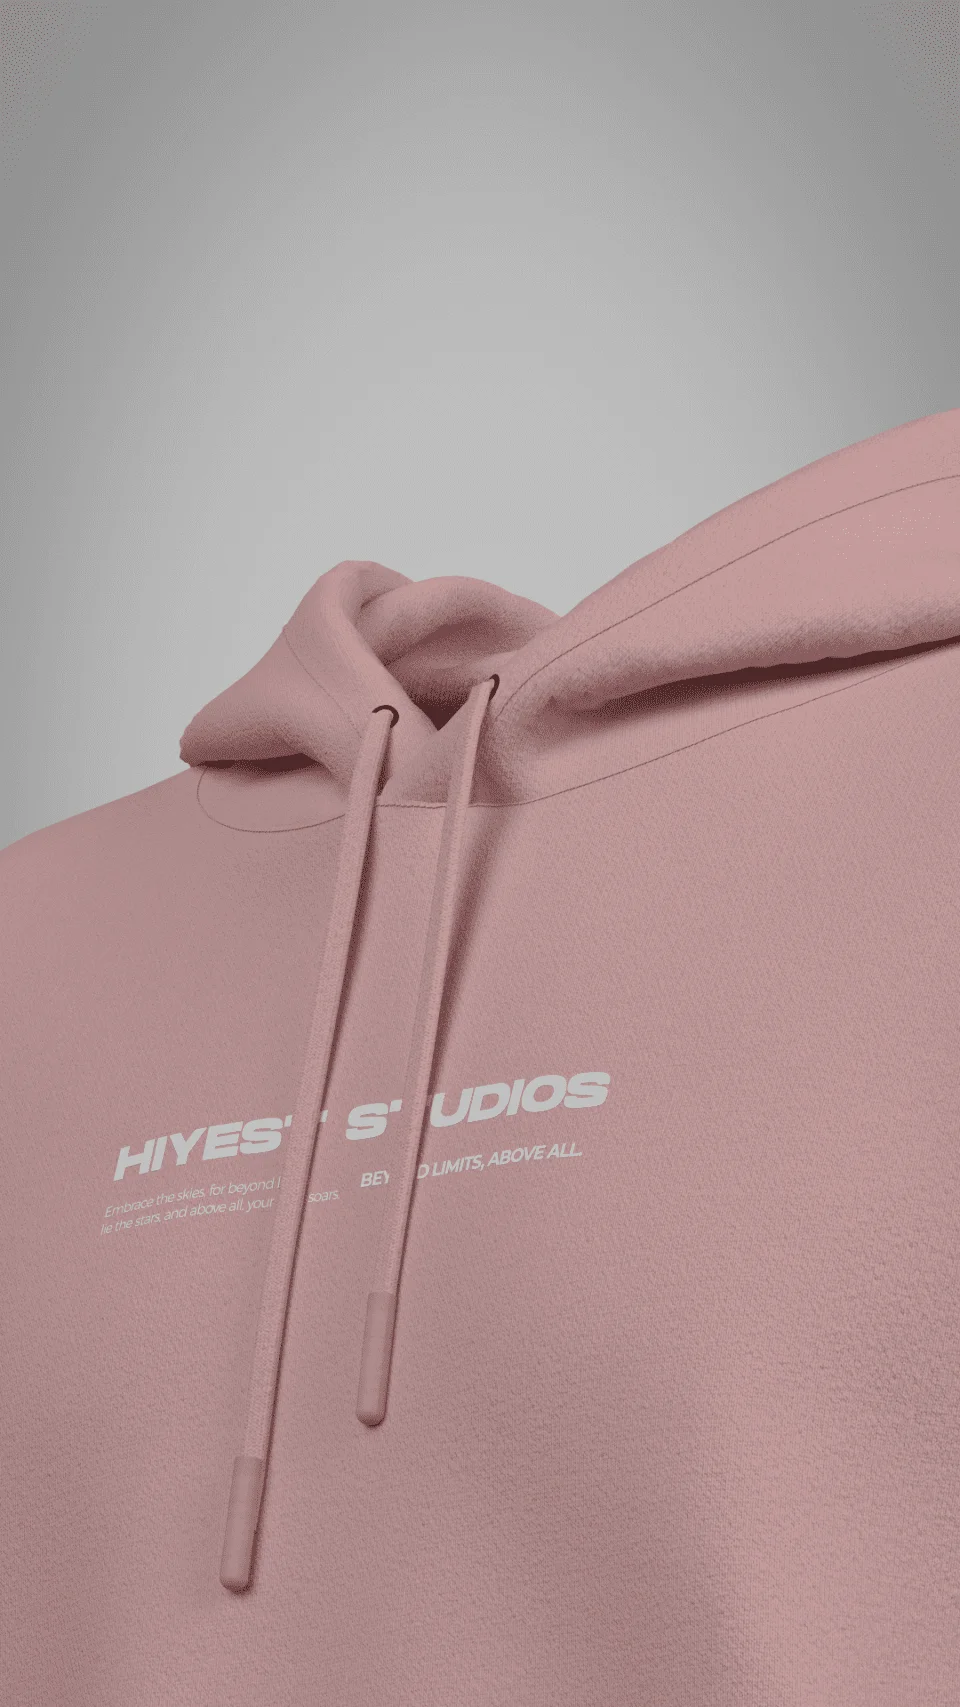 category on sale, pink pink category, category  online, best pink oversized hoodie store near me, top-rated pink category for men & women, premium solid pink category: hiyest studios, pink category